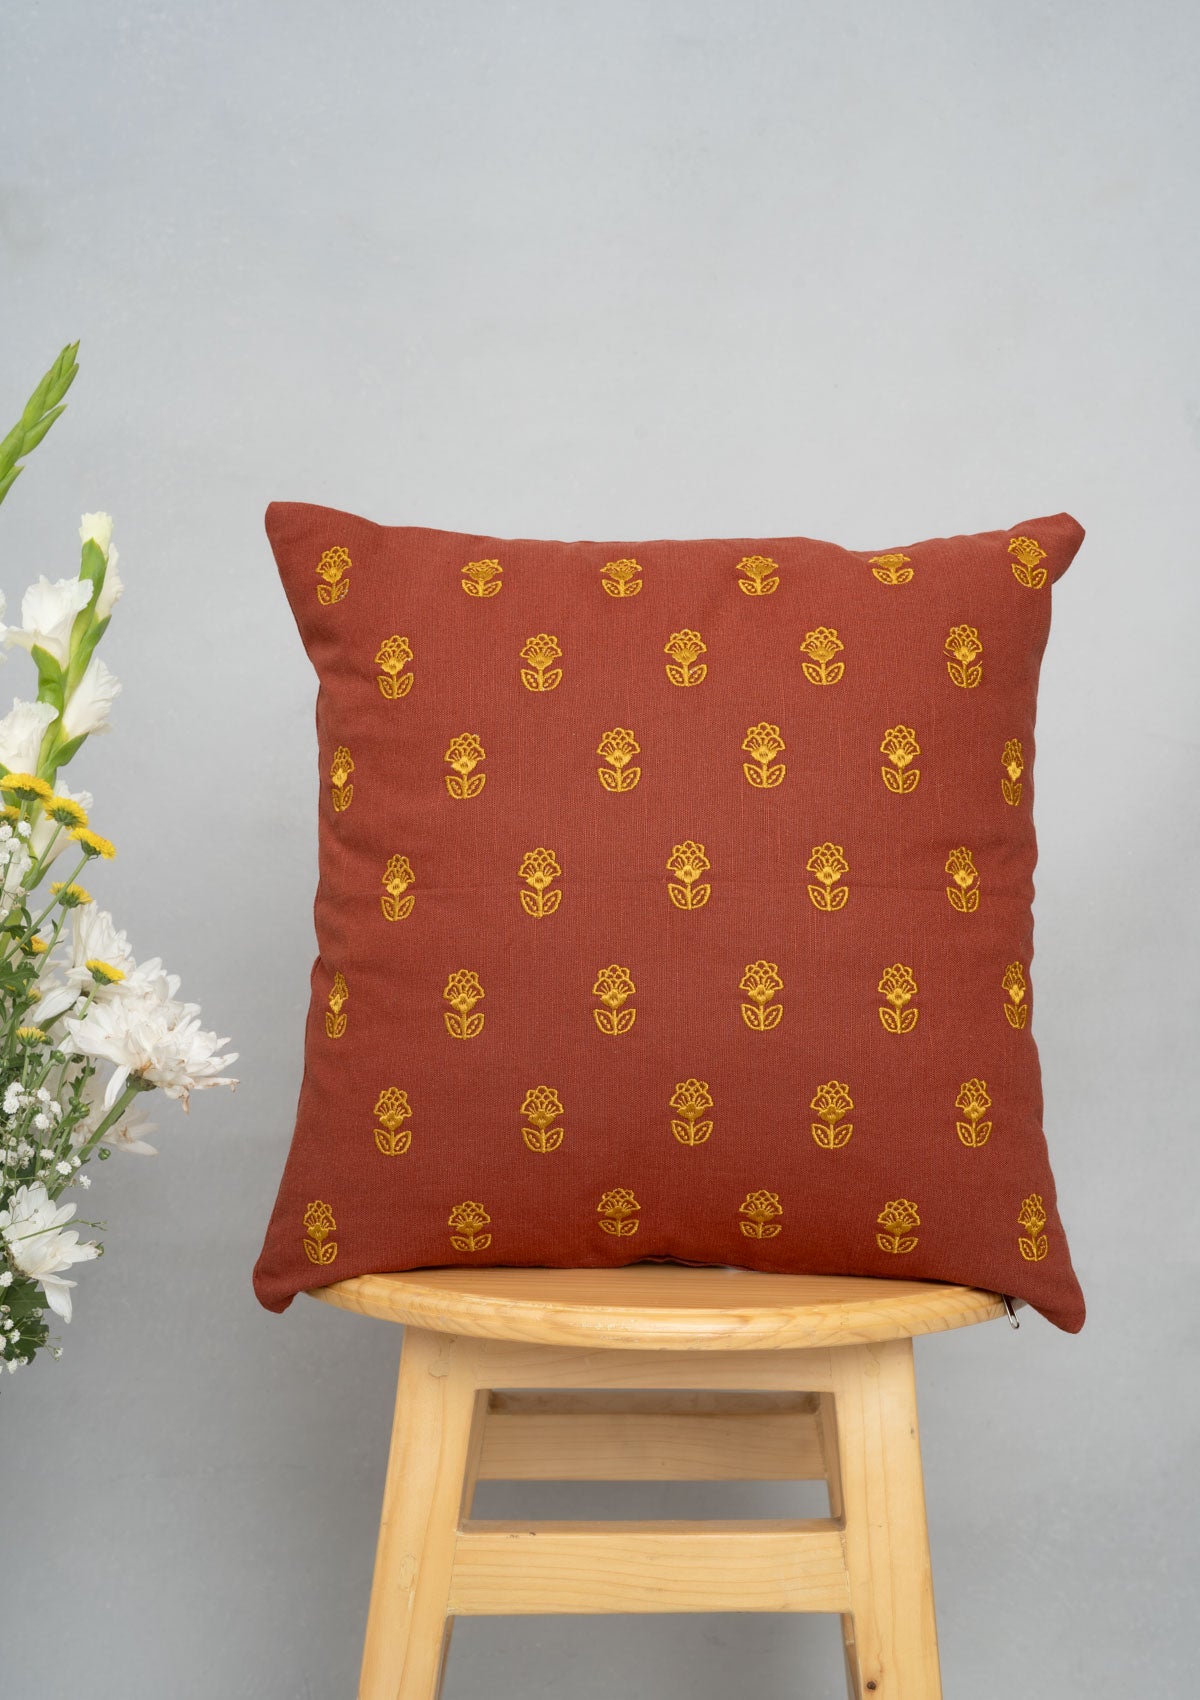 Kesar 100% cotton embroidered decorative cushion cover for sofa - Brick Red